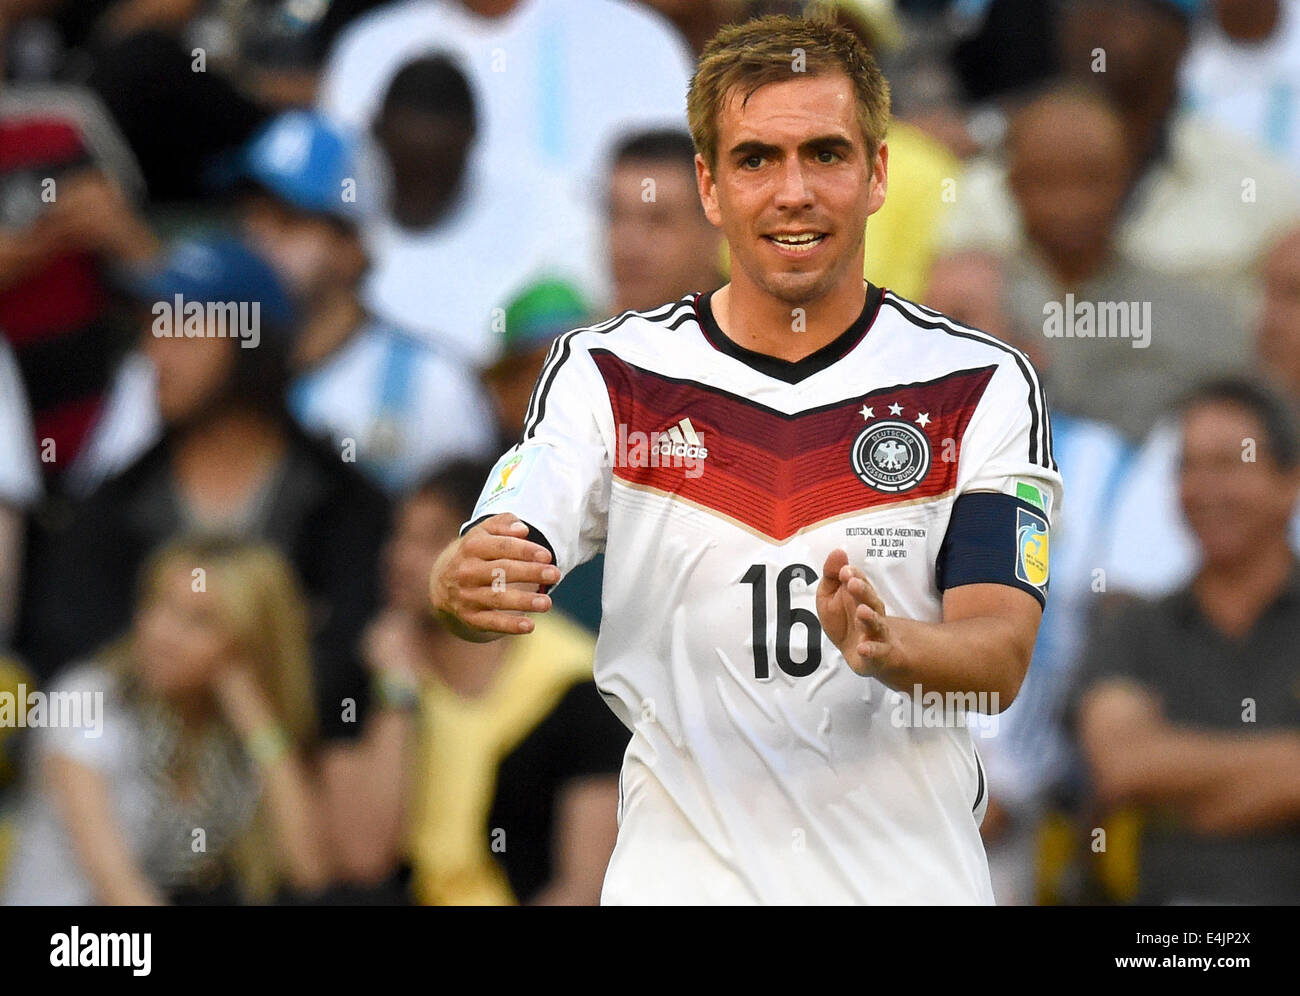 Rio de Janeiro, Brazil. 13th July, 2014. Philipp Lahm of Germany gestures during the FIFA World Cup 2014 final soccer match between Germany and Argentina at the Estadio do Maracana in Rio de Janeiro, Brazil, 13 July 2014. Photo: Marcus Brandt/dpa/Alamy Live News Stock Photo